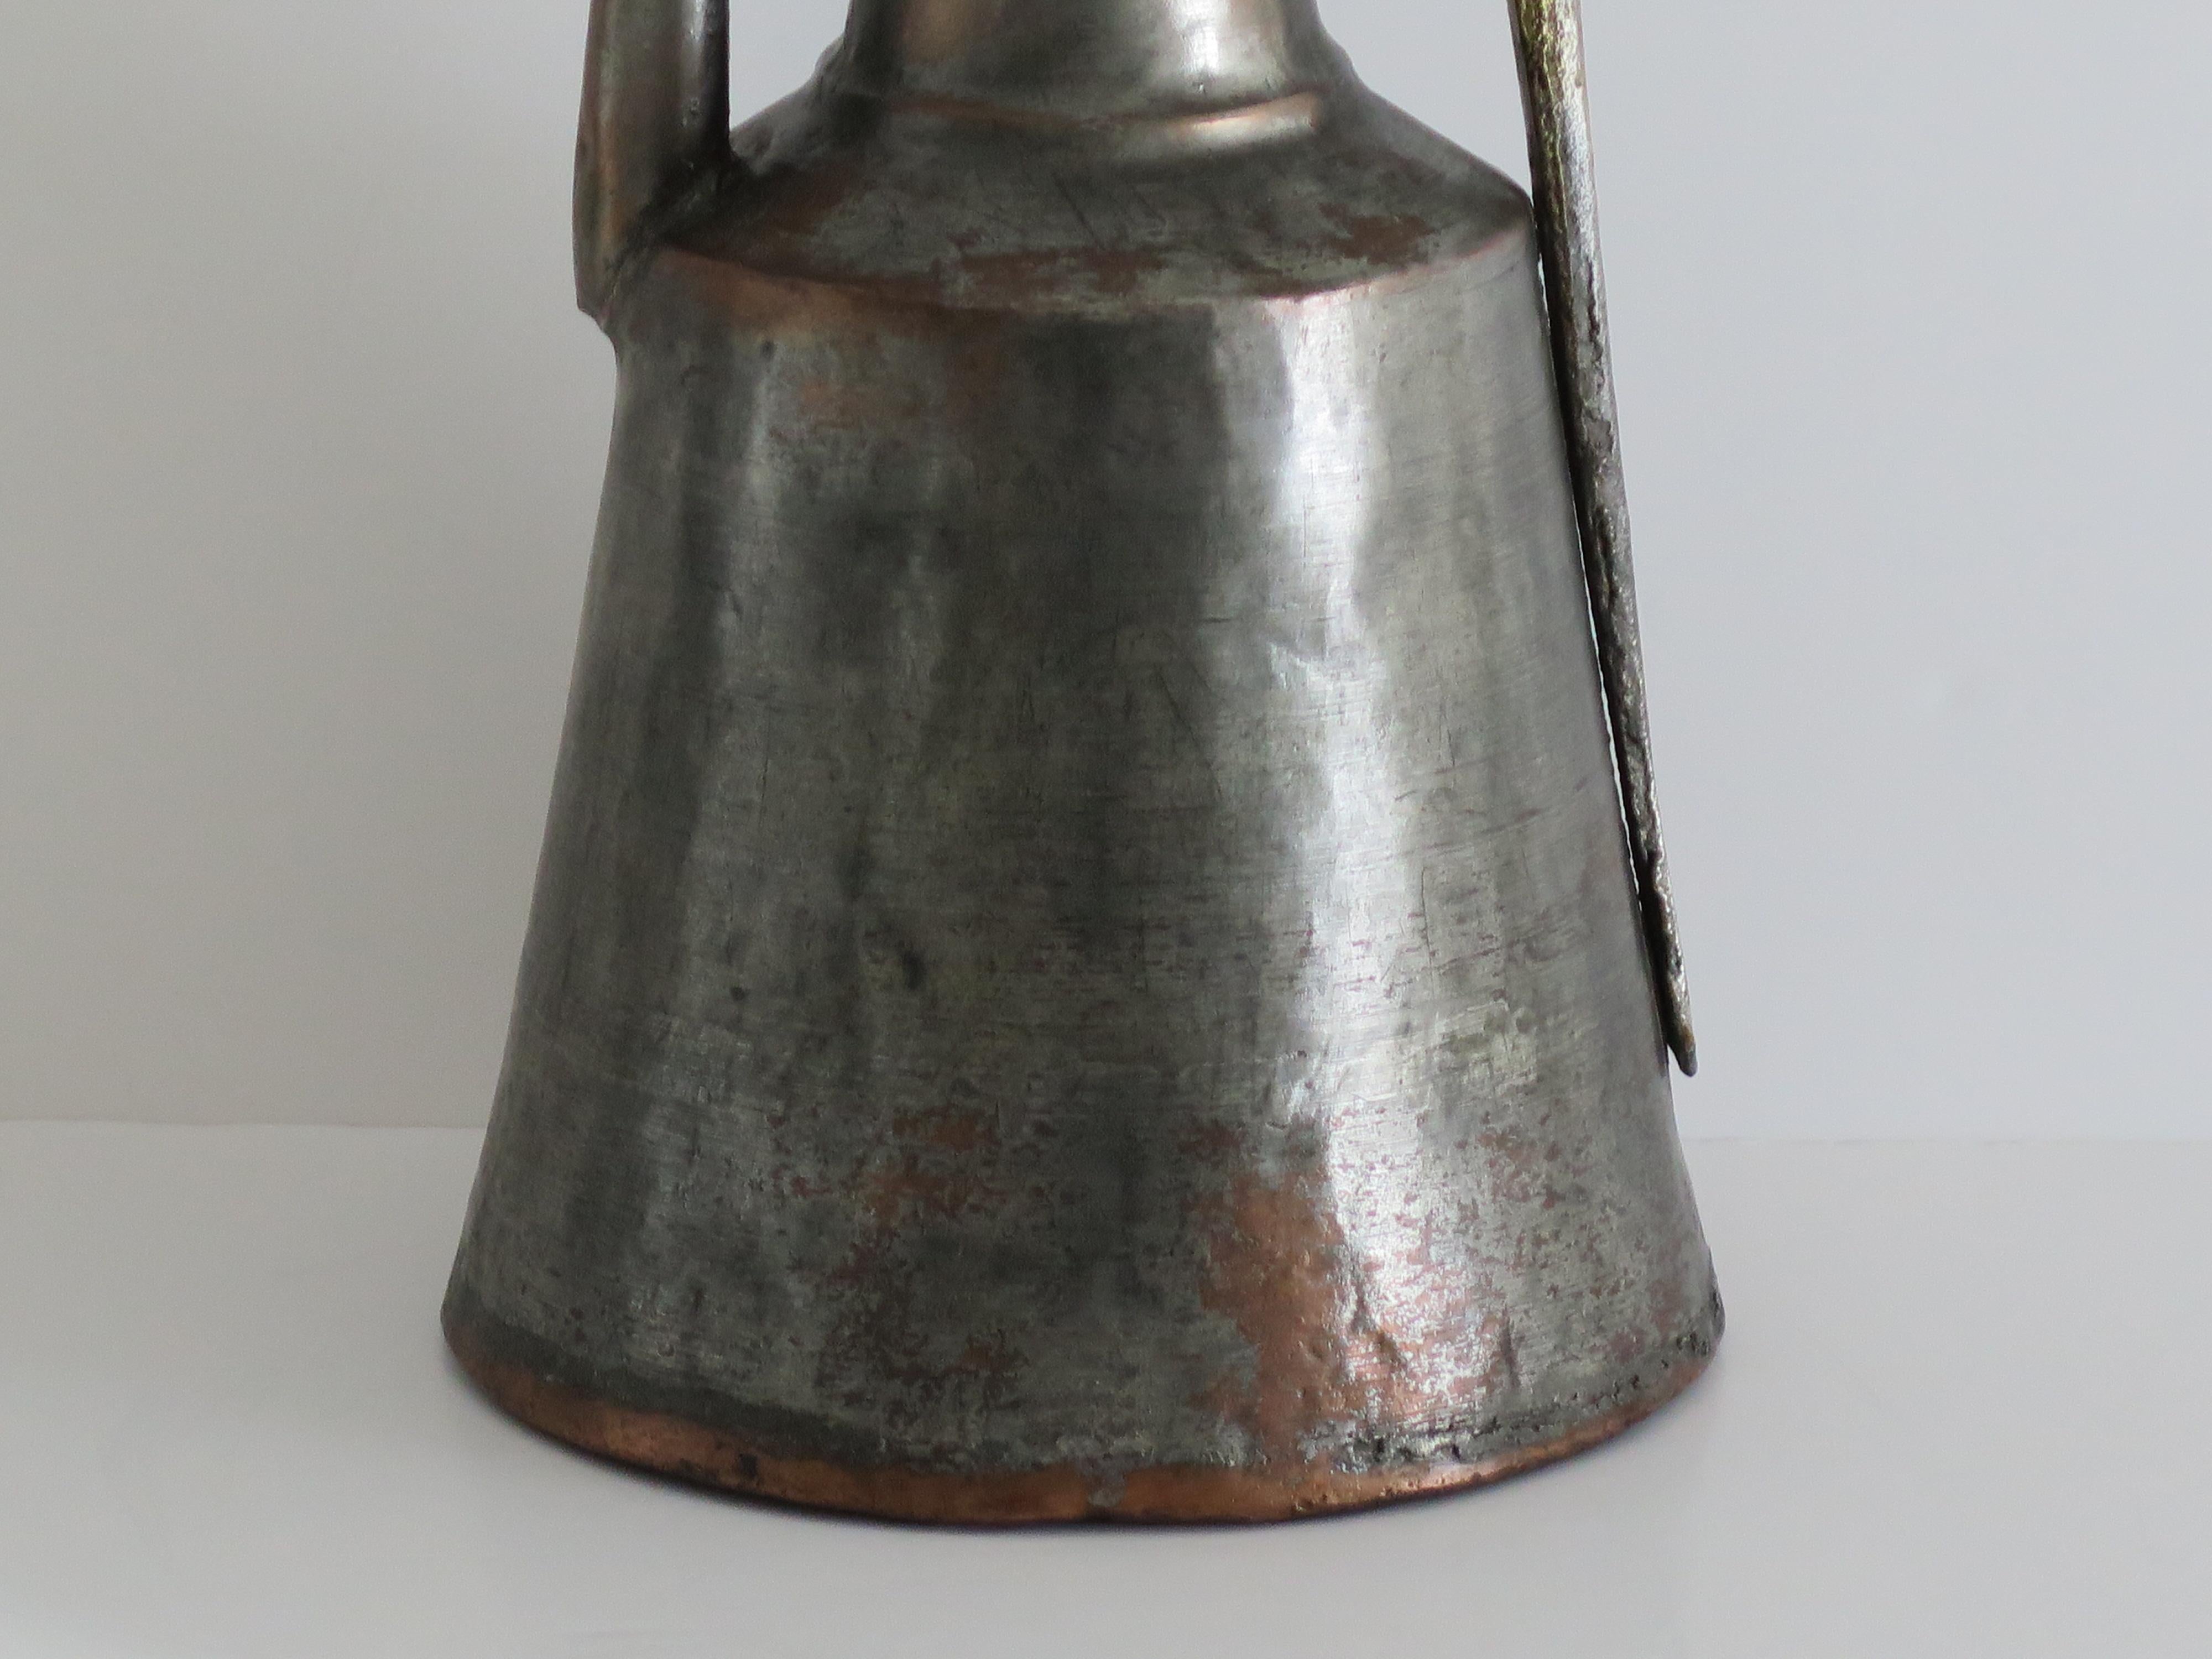 Ewer or Pitcher tinned Copper Turkish / Middle Eastern, Early 19th Century For Sale 5